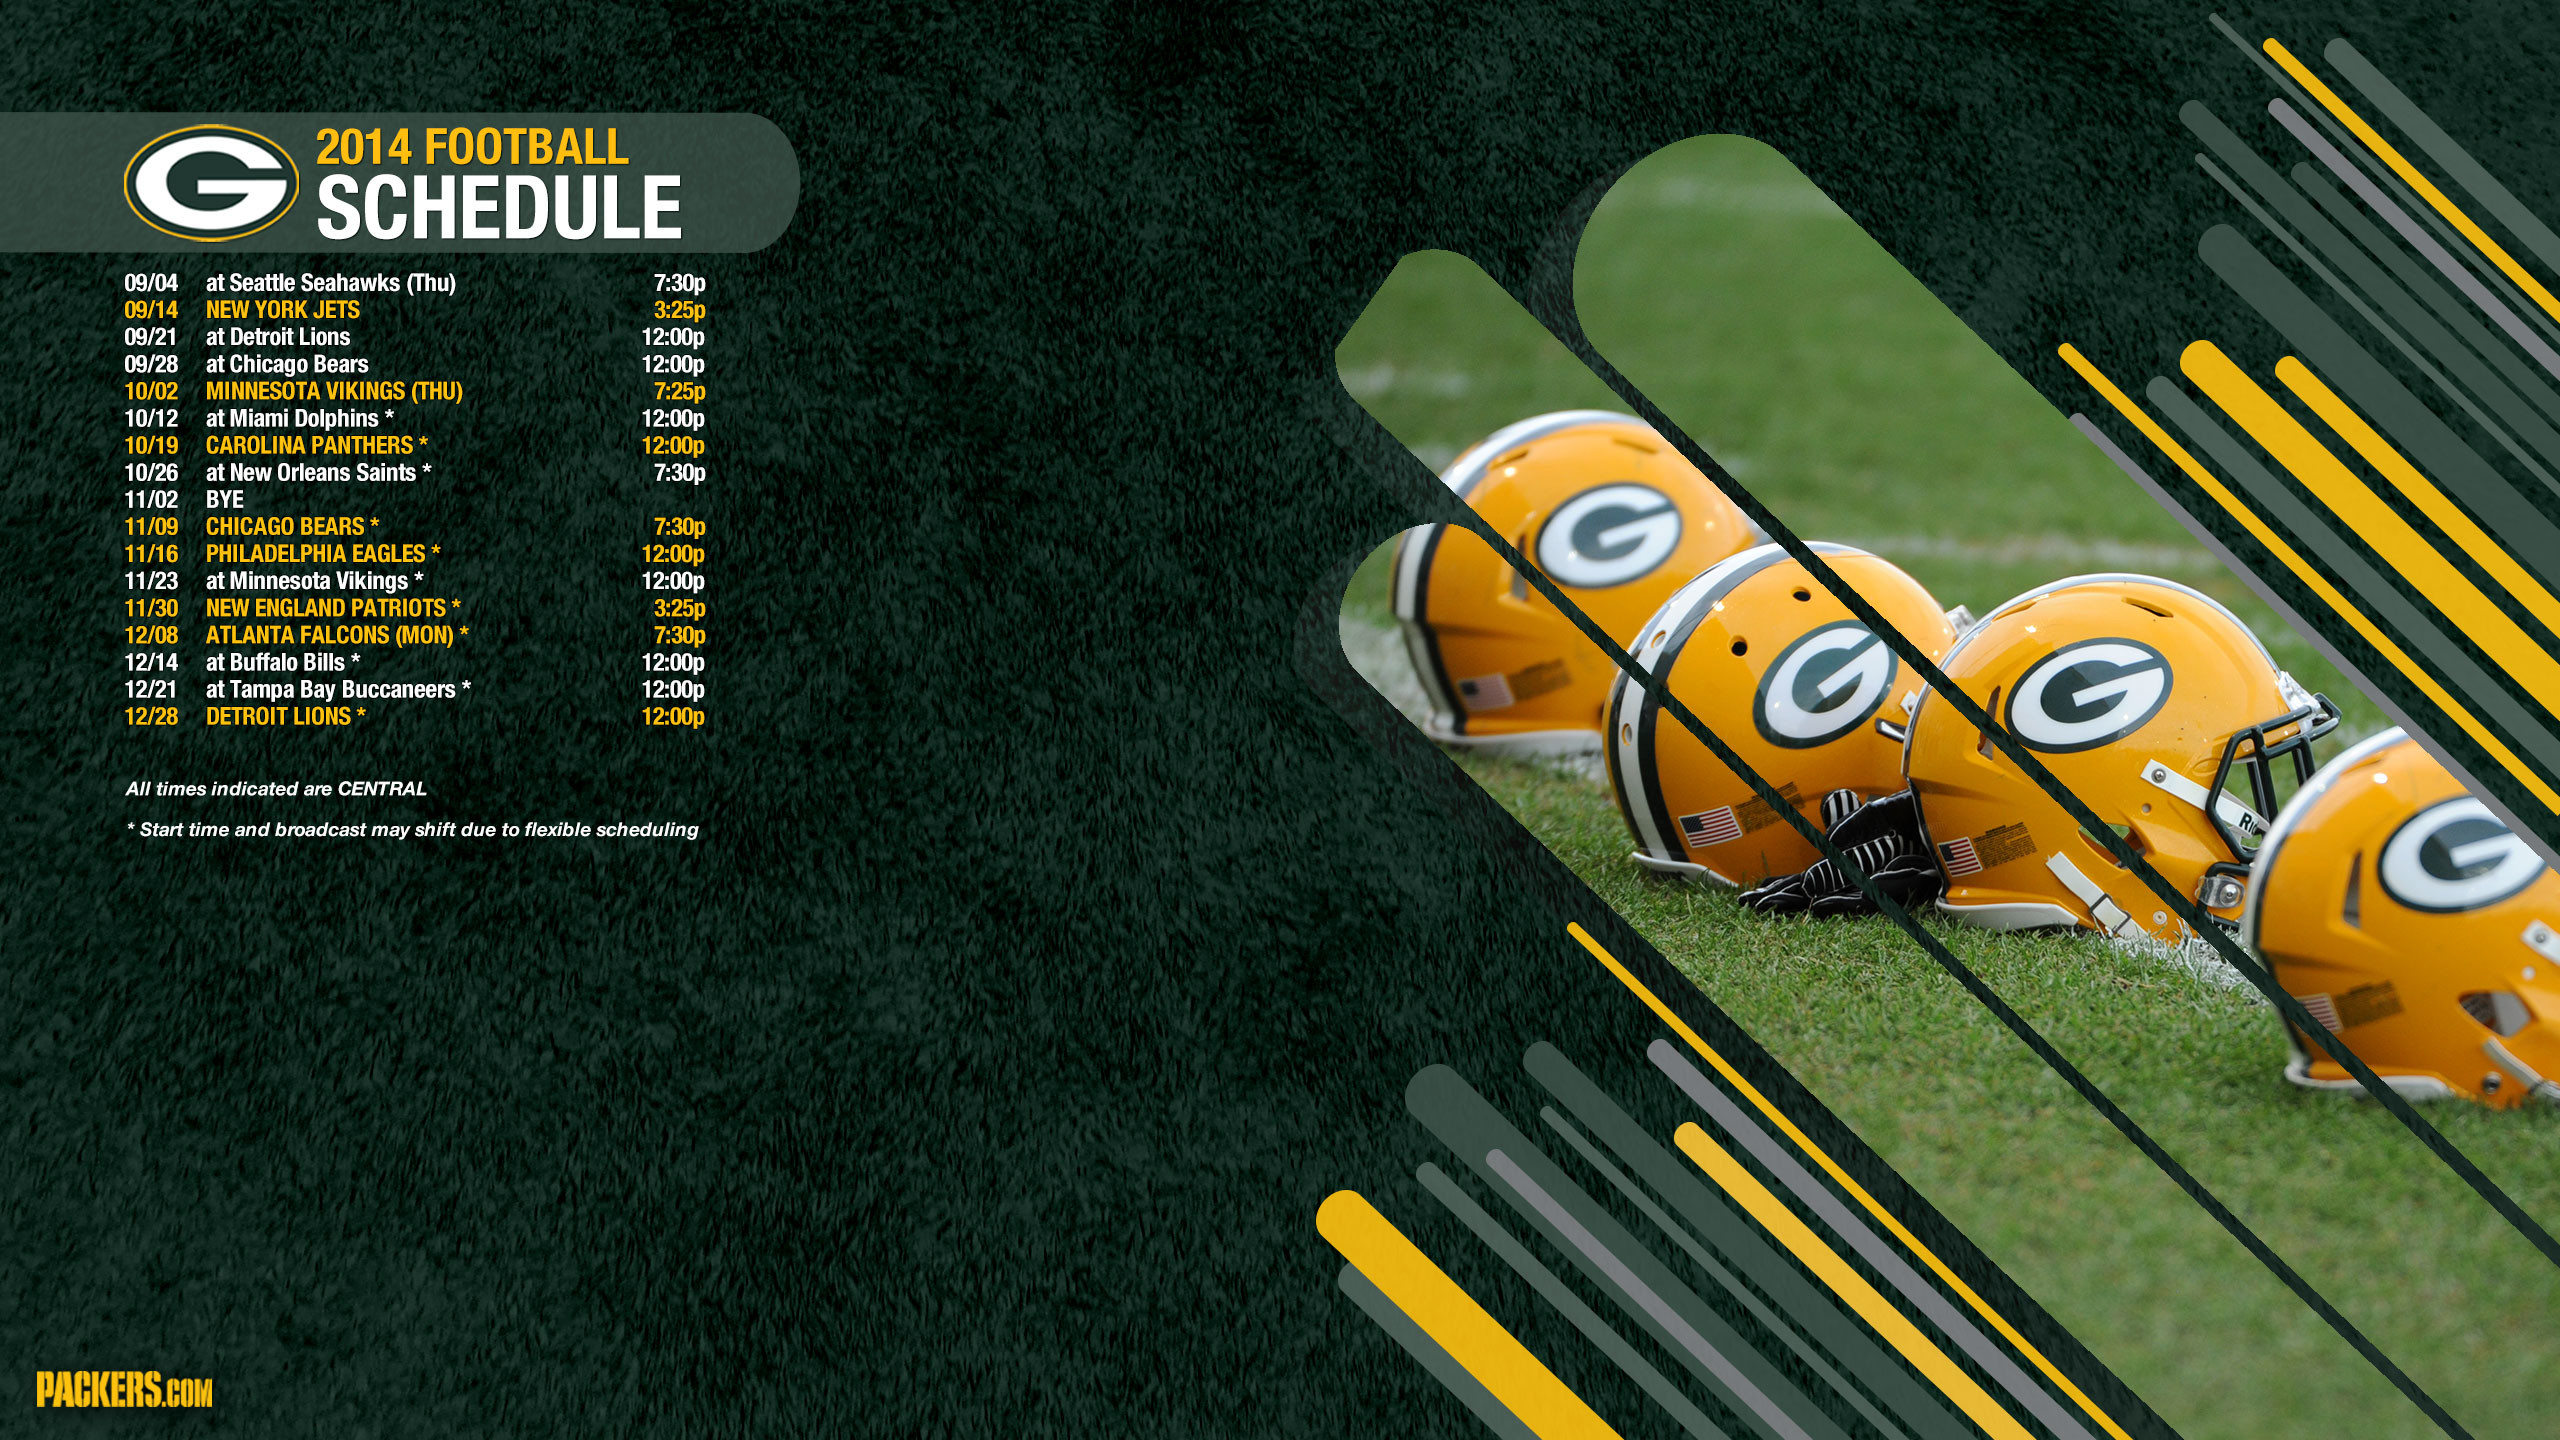 2560x1440 Packers.com | Wallpapers: 2014 Miscellaneous